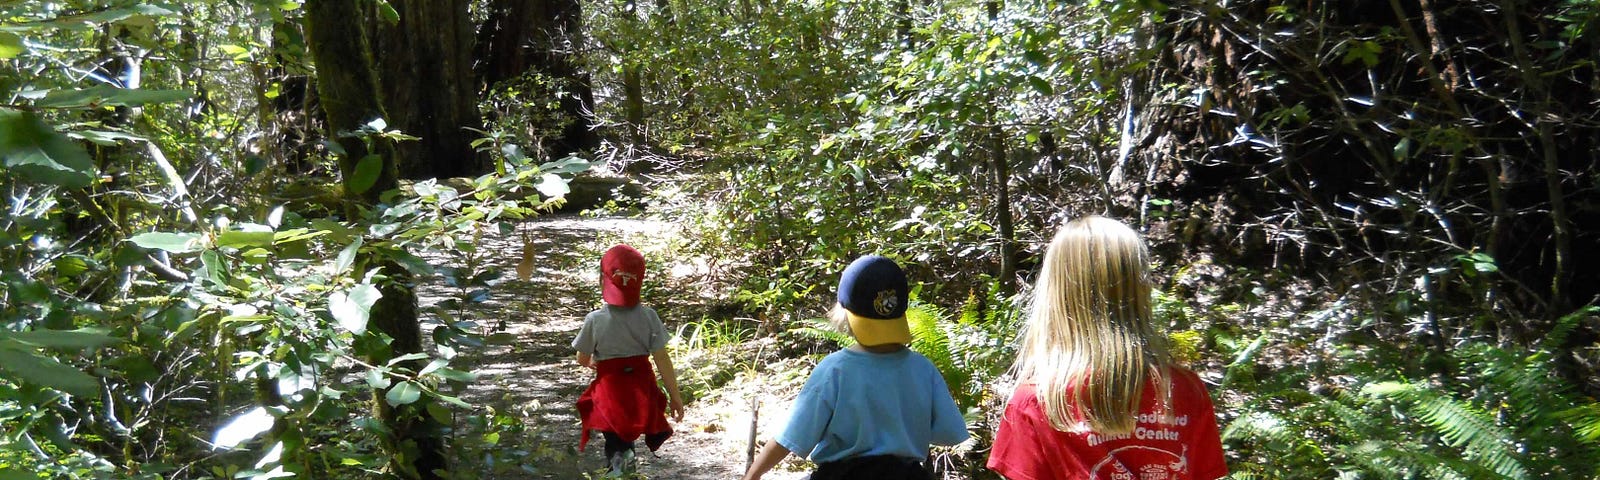 kids hiking on a forest trail — medium story boost